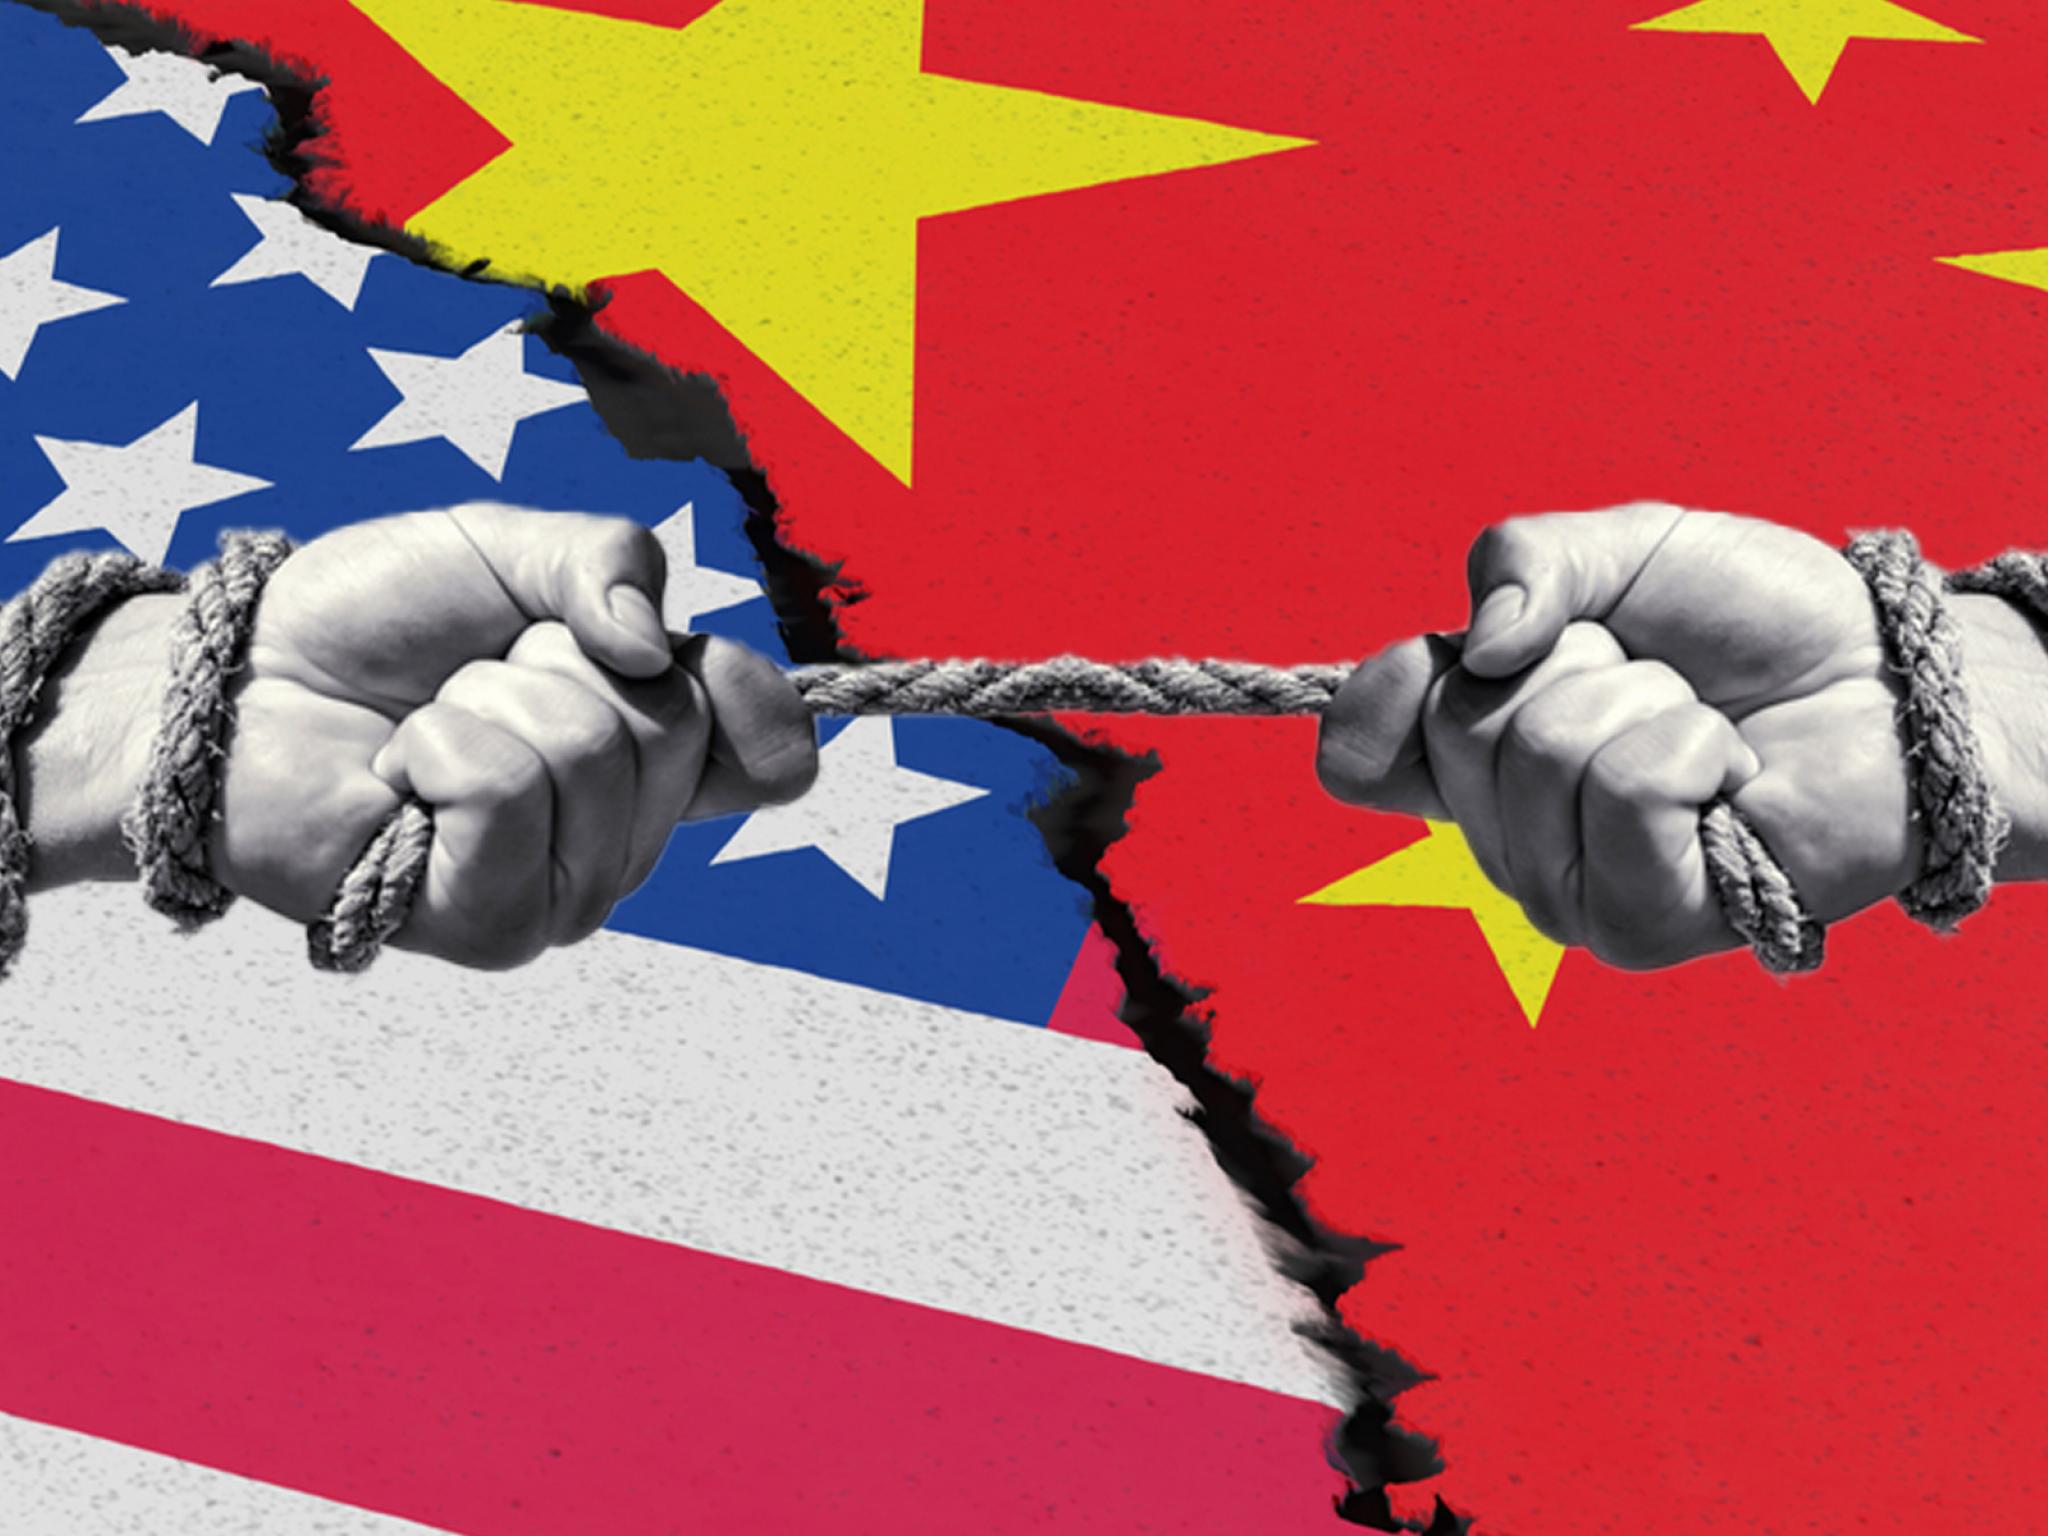  us-chip-embargo-has-started-taking-toll-on-china-data-suggests 